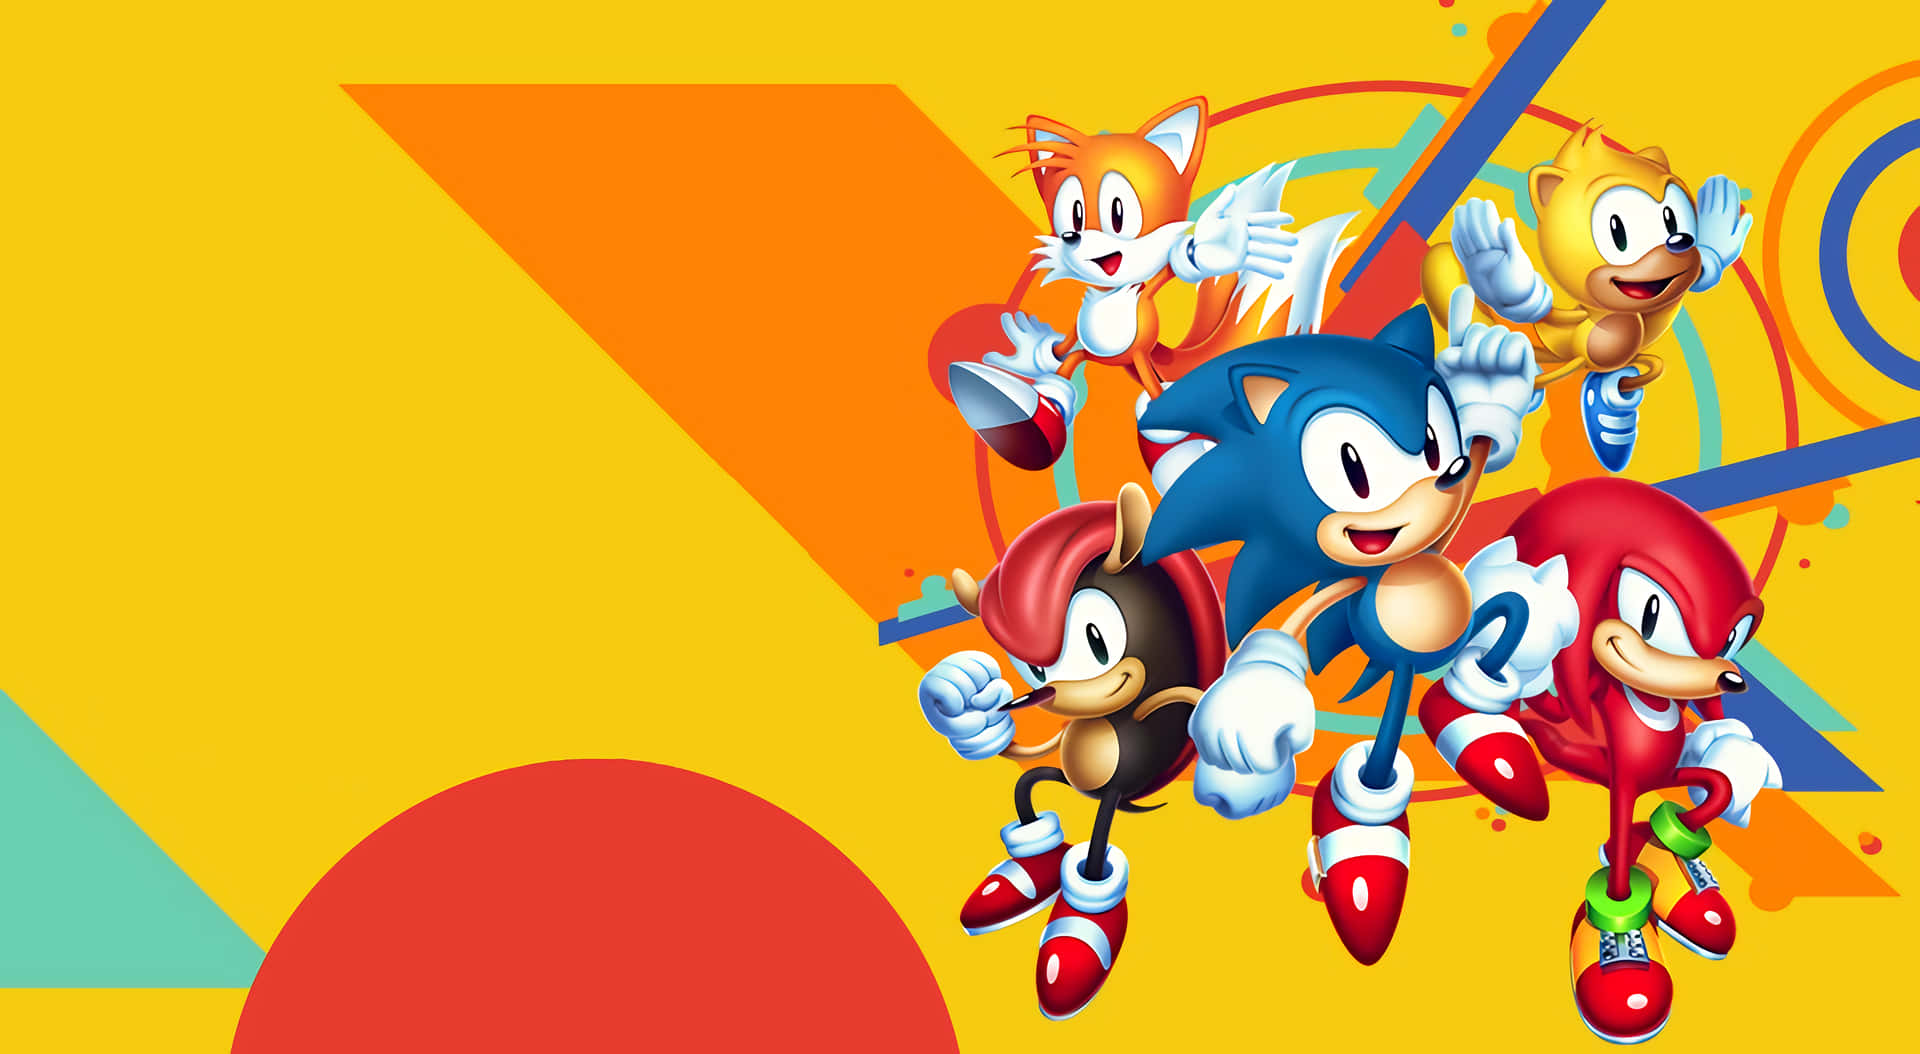 Sonic The Hedgehog happily running through the classic Green Hill Zone Wallpaper